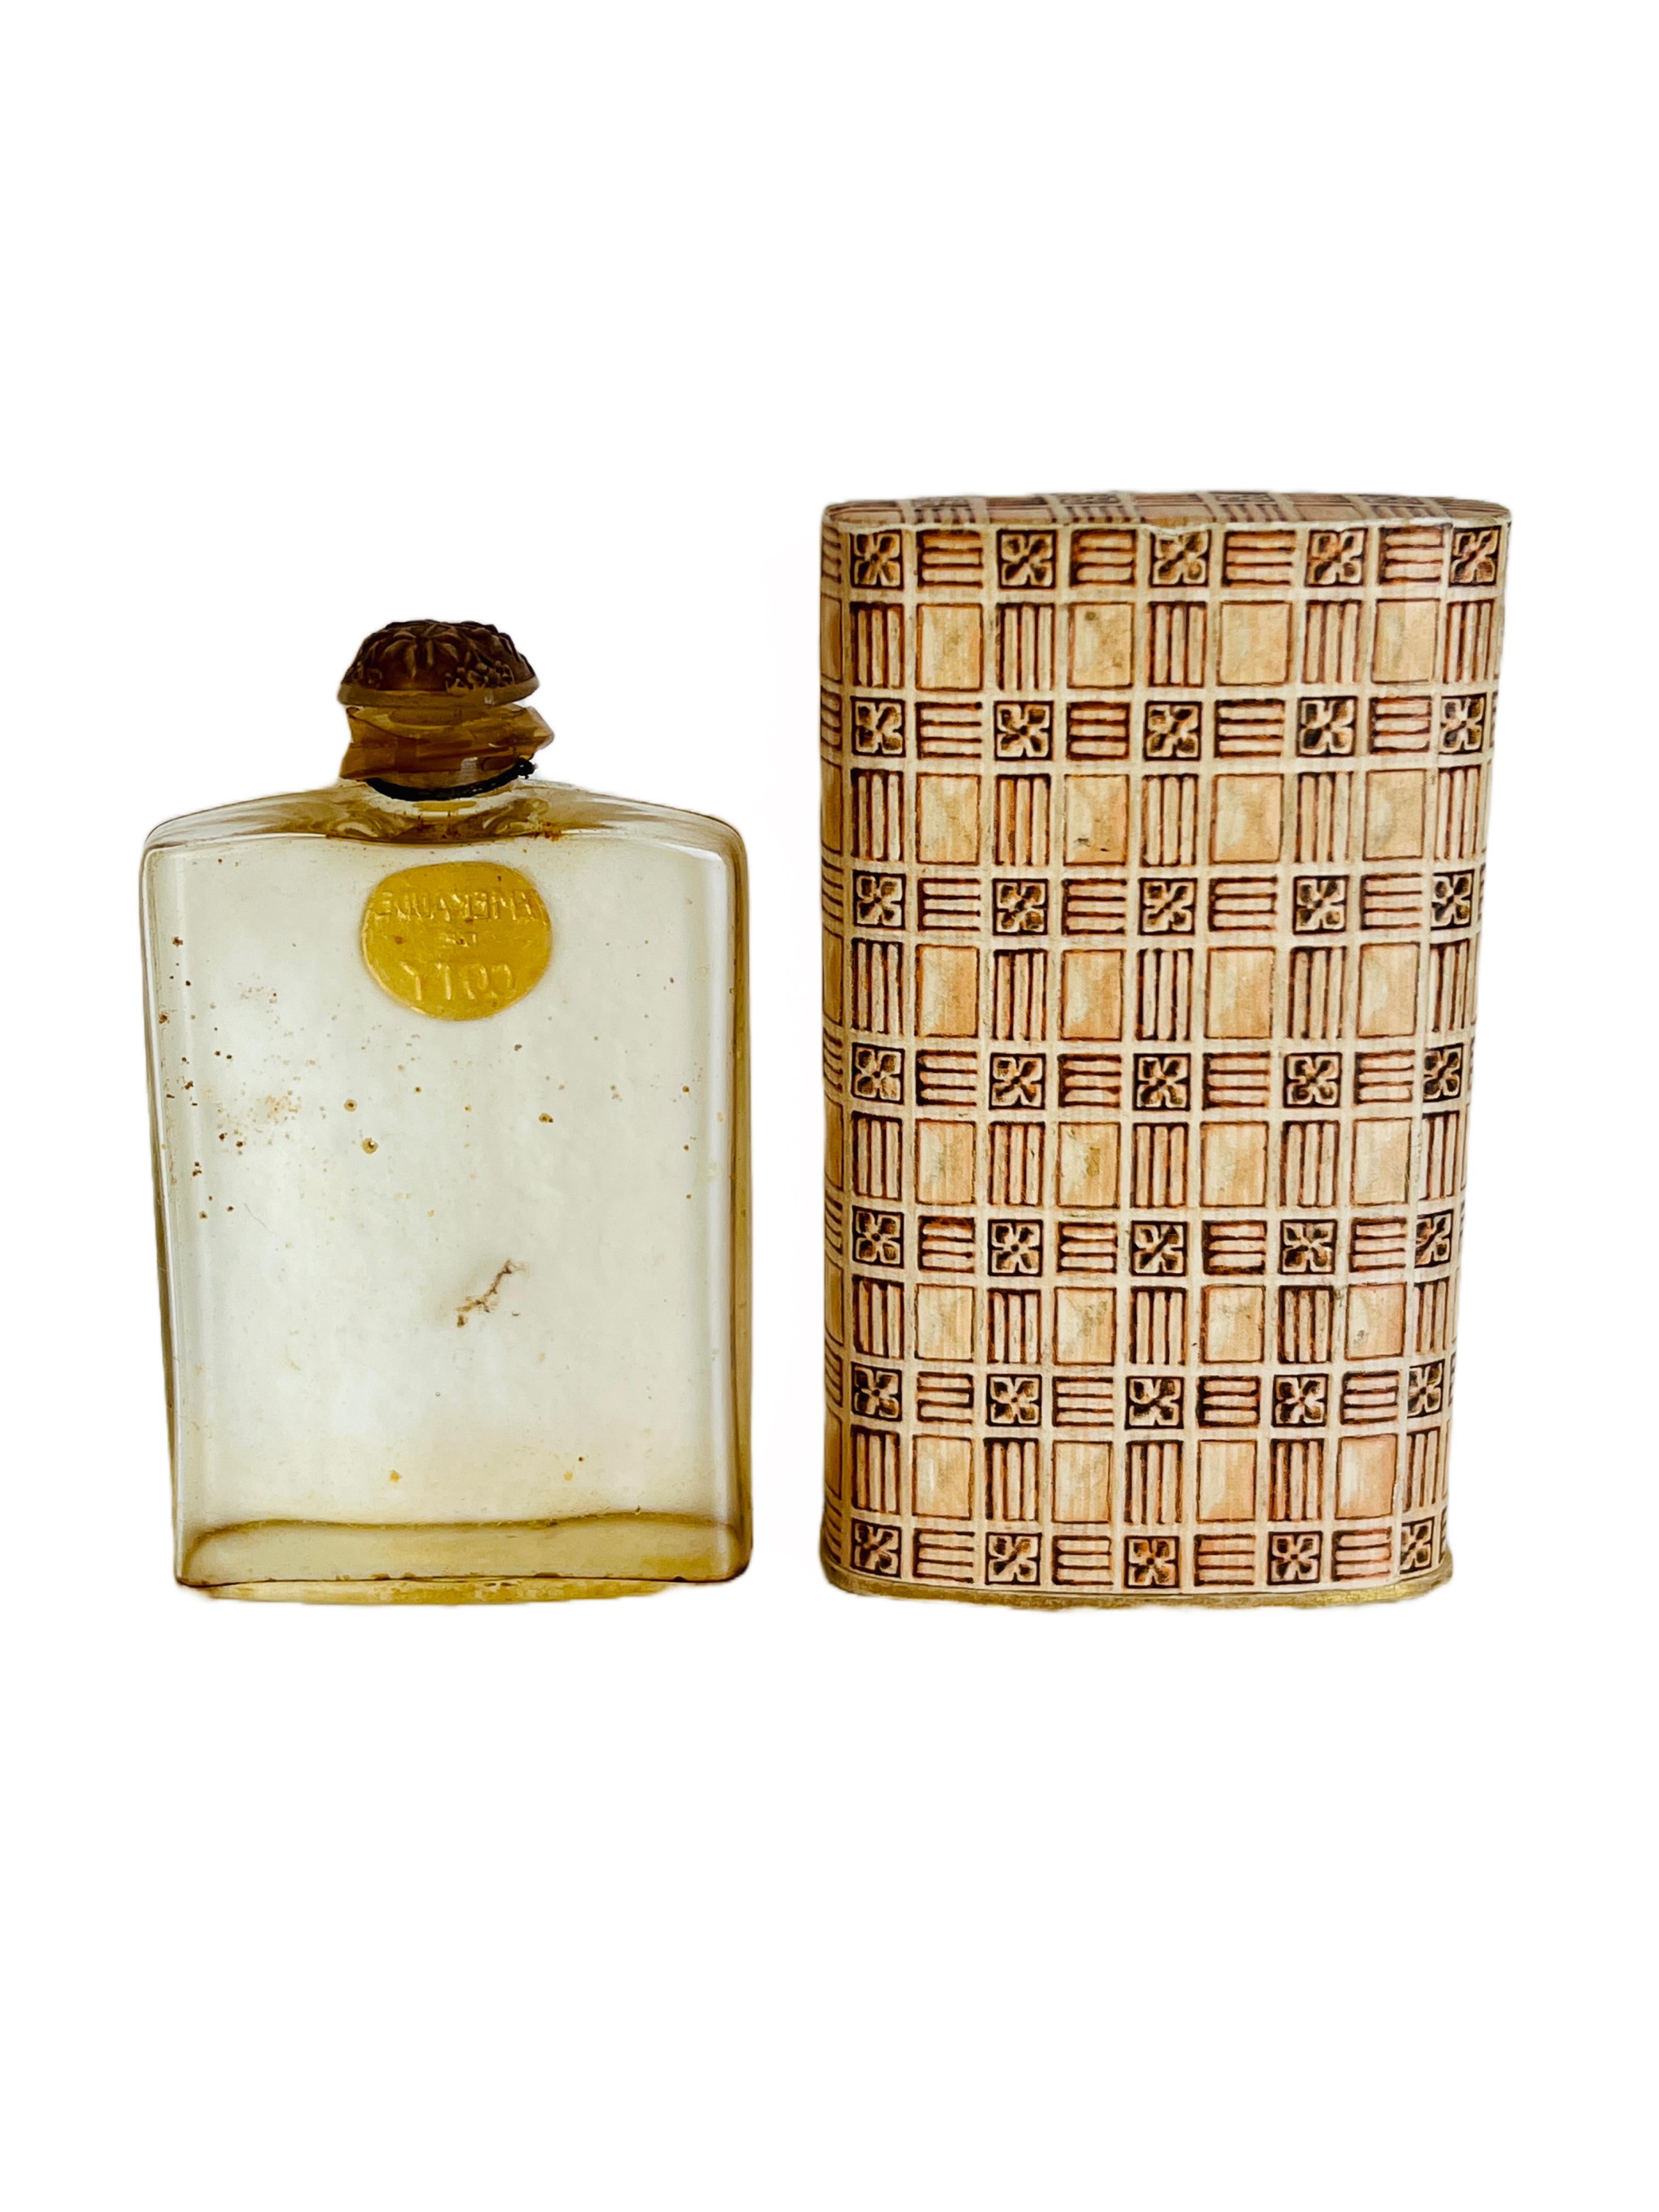 This empty Lalique perfume bottle once contained one of Coty's earliest creations, 